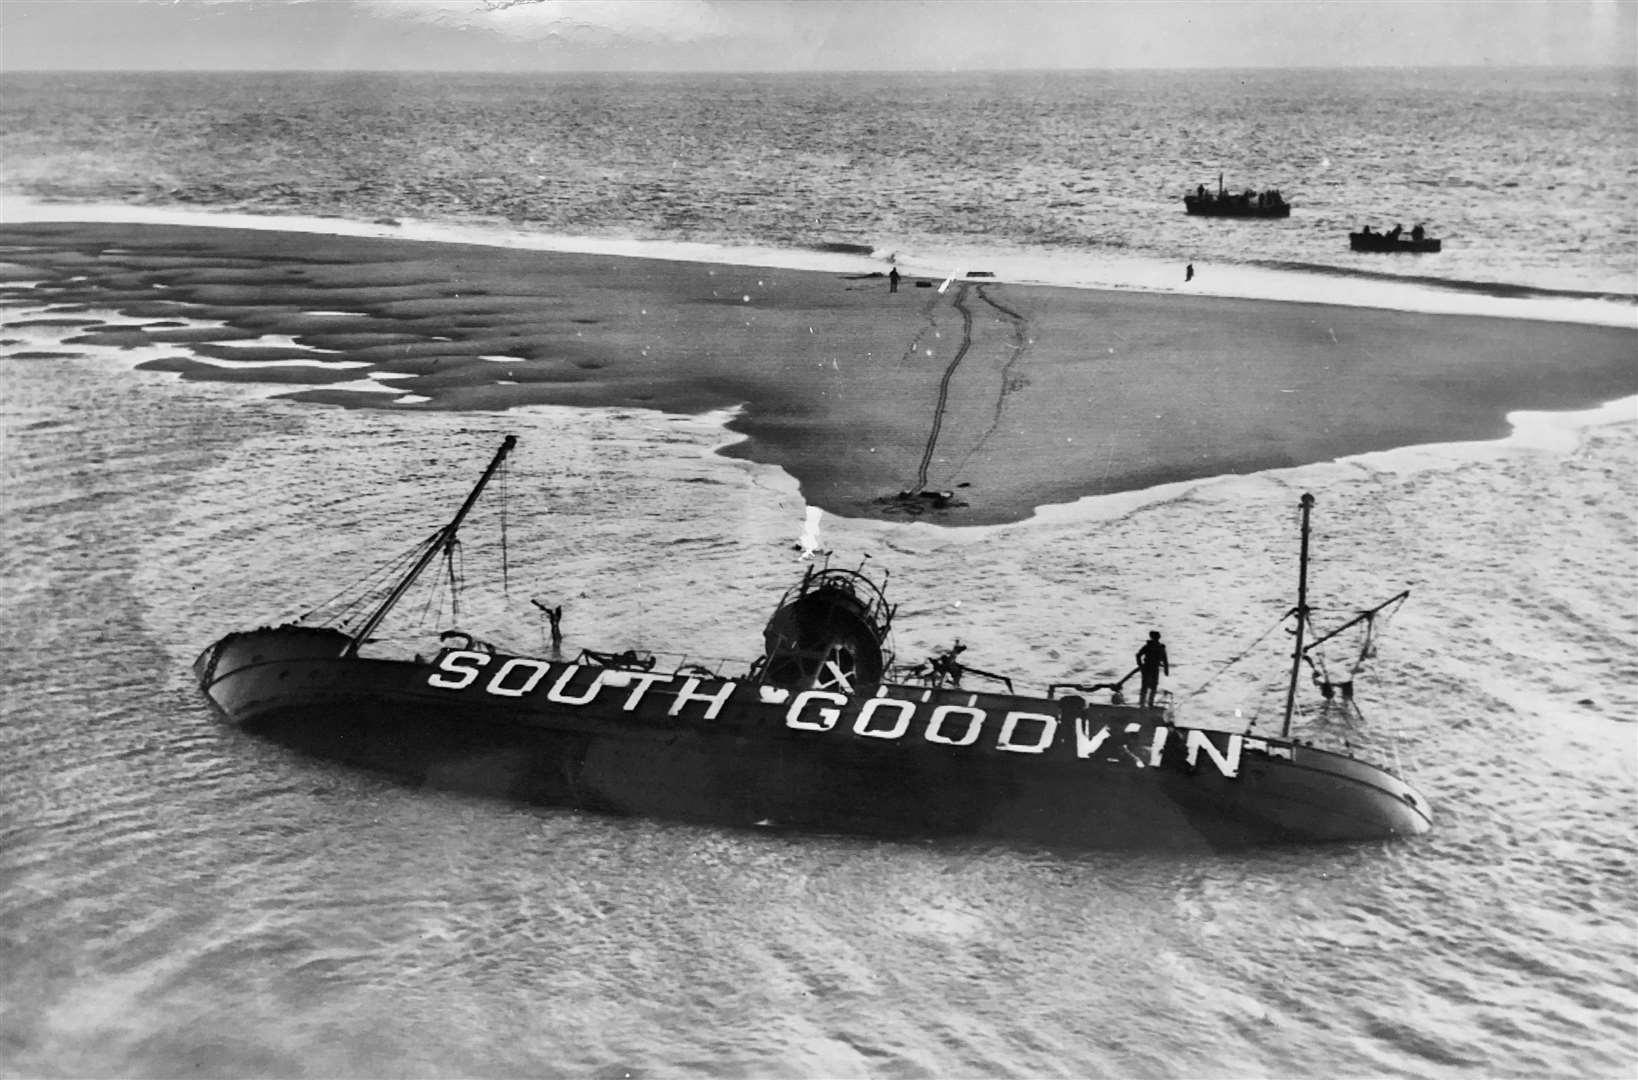 Wreck of the South Goodwin Light Vessel 1954. Photo: Colin Varrall